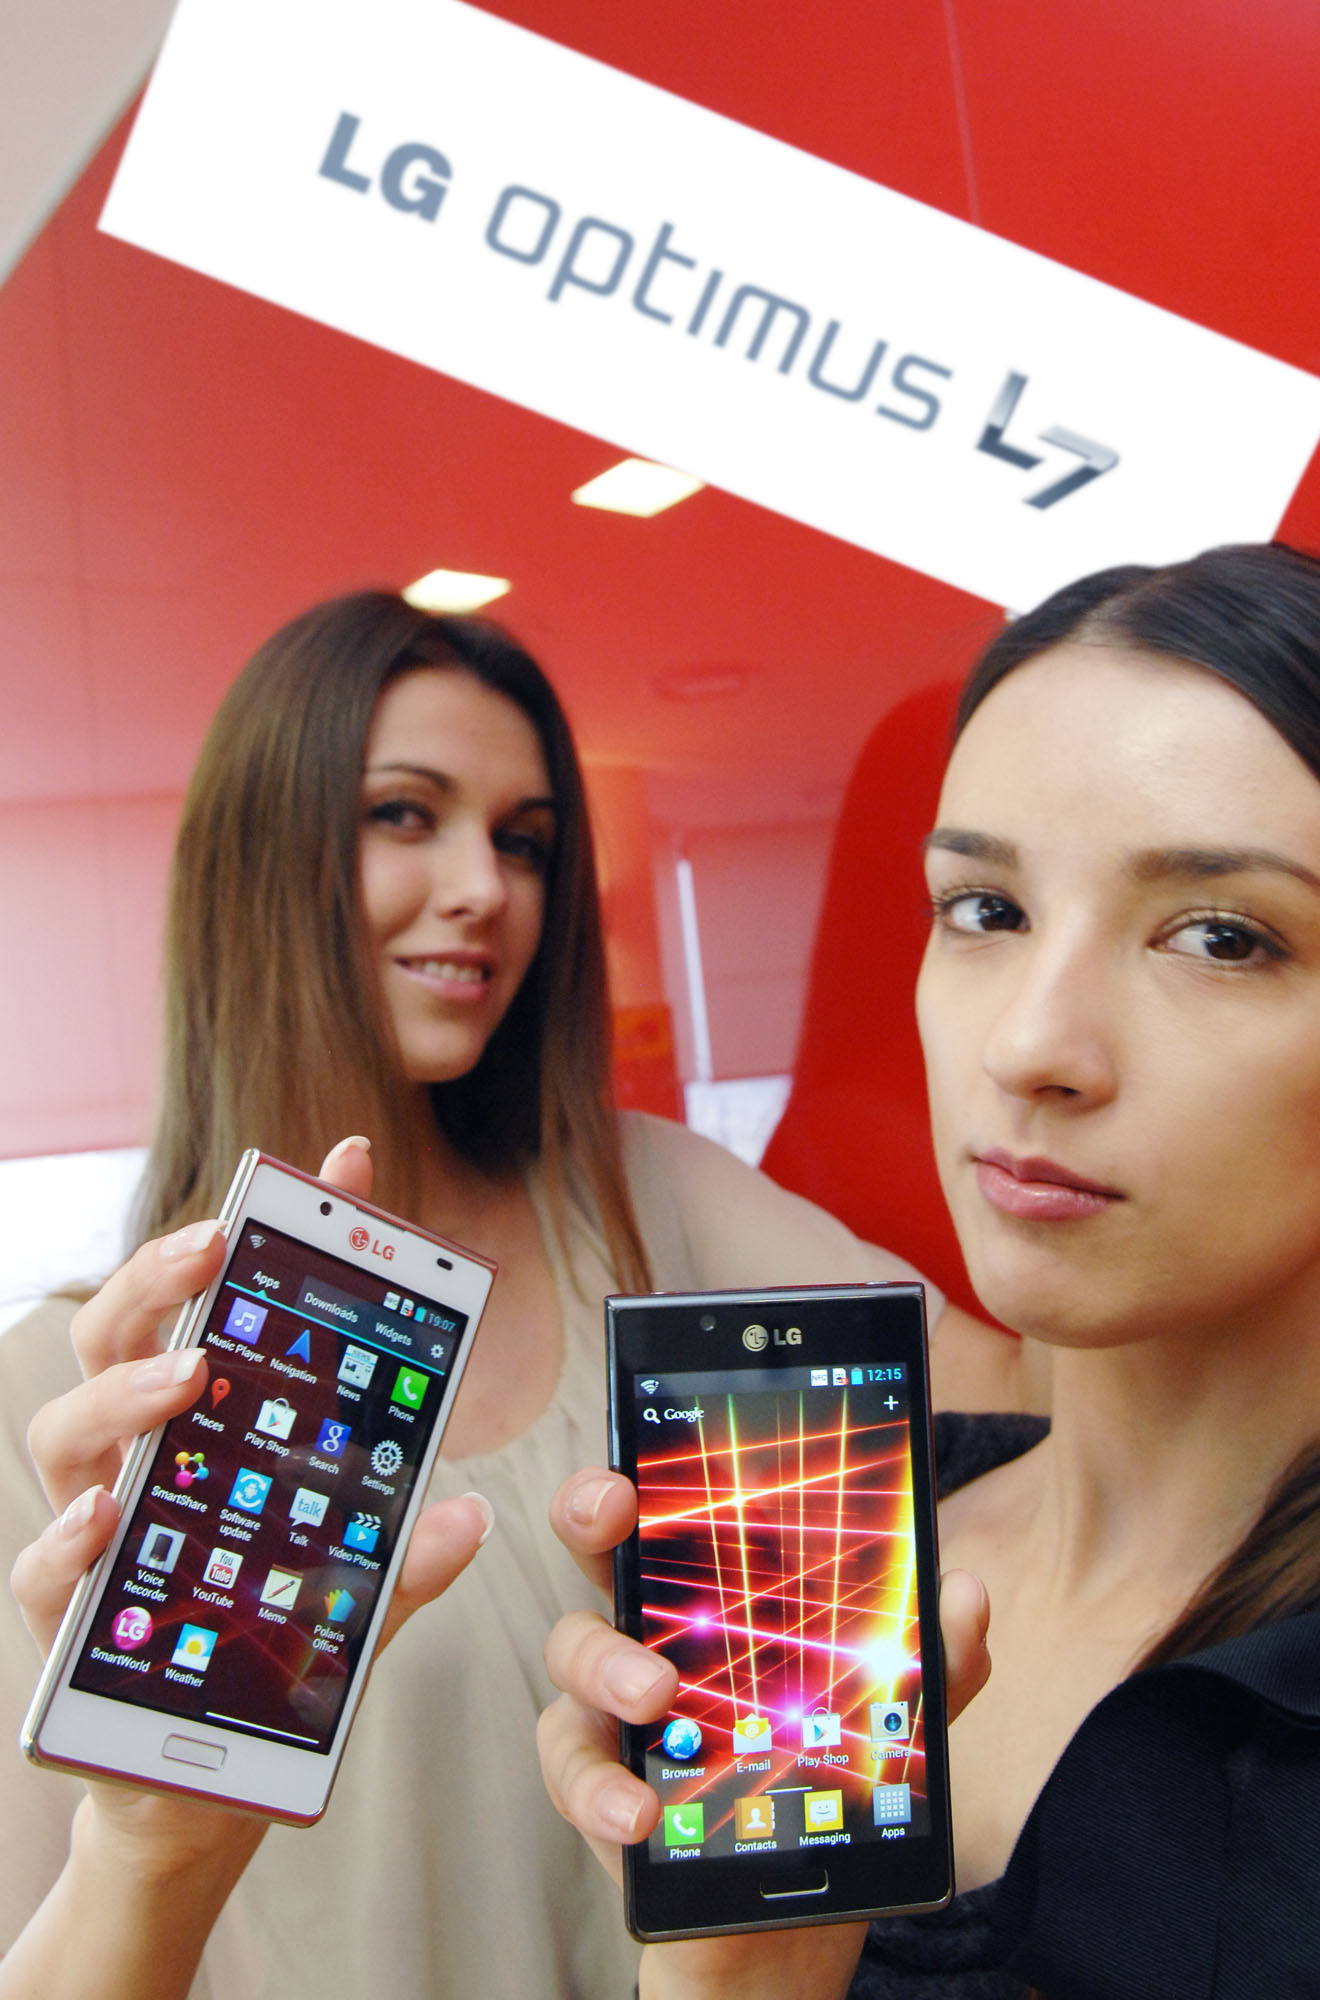 The last image of two female models holding the LG OPTIMUS L7 smartphone and its brand name panel